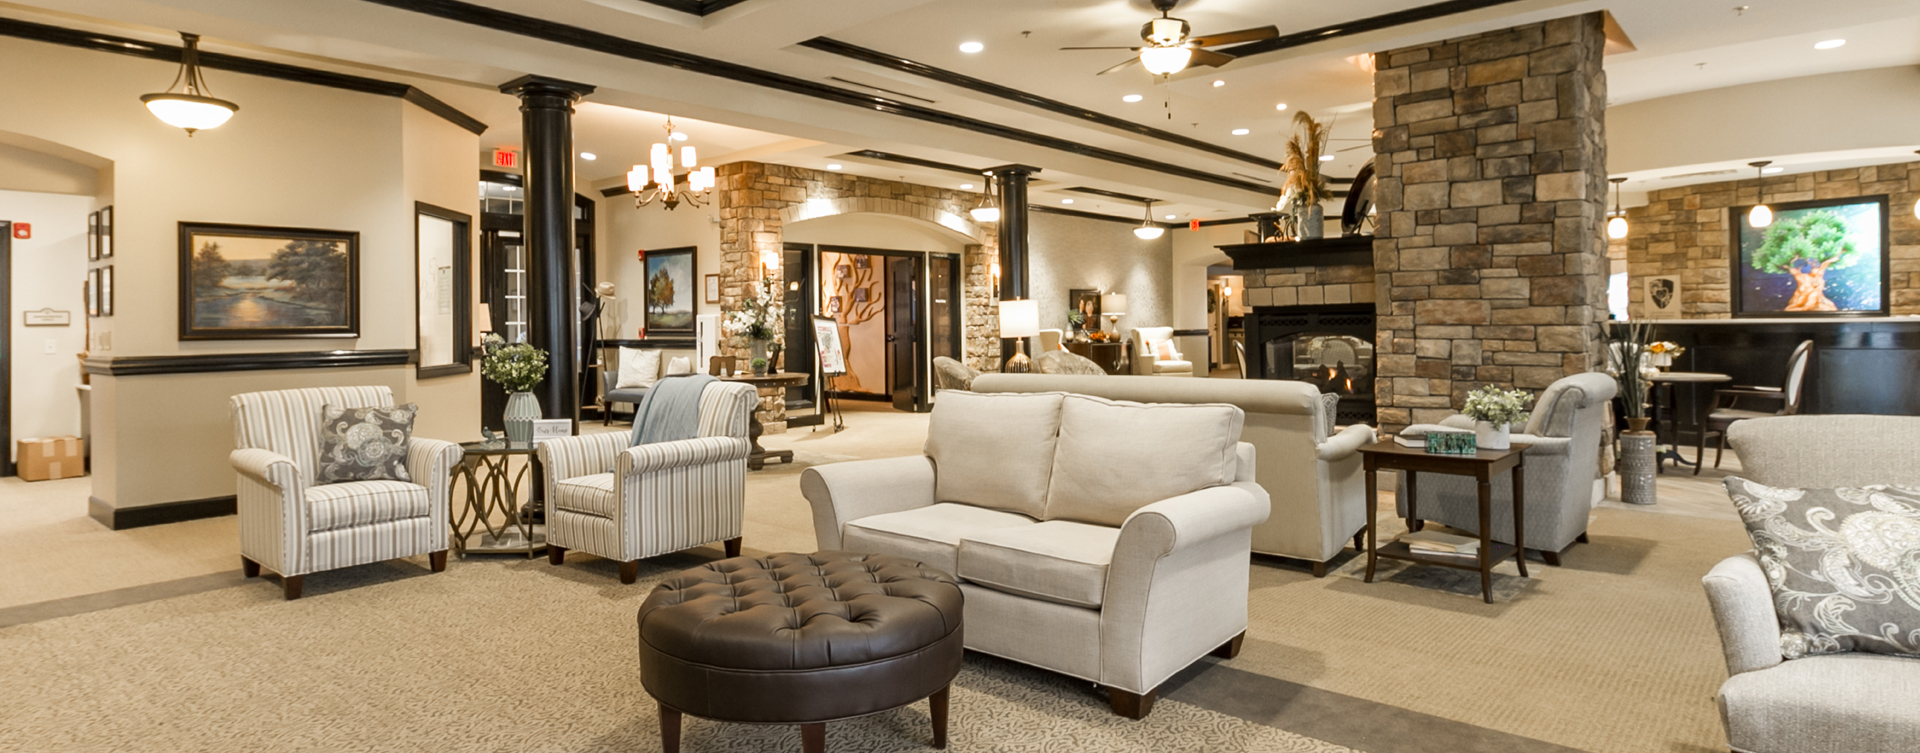 Snooze in your favorite chair in the living room at Bickford of Virginia Beach